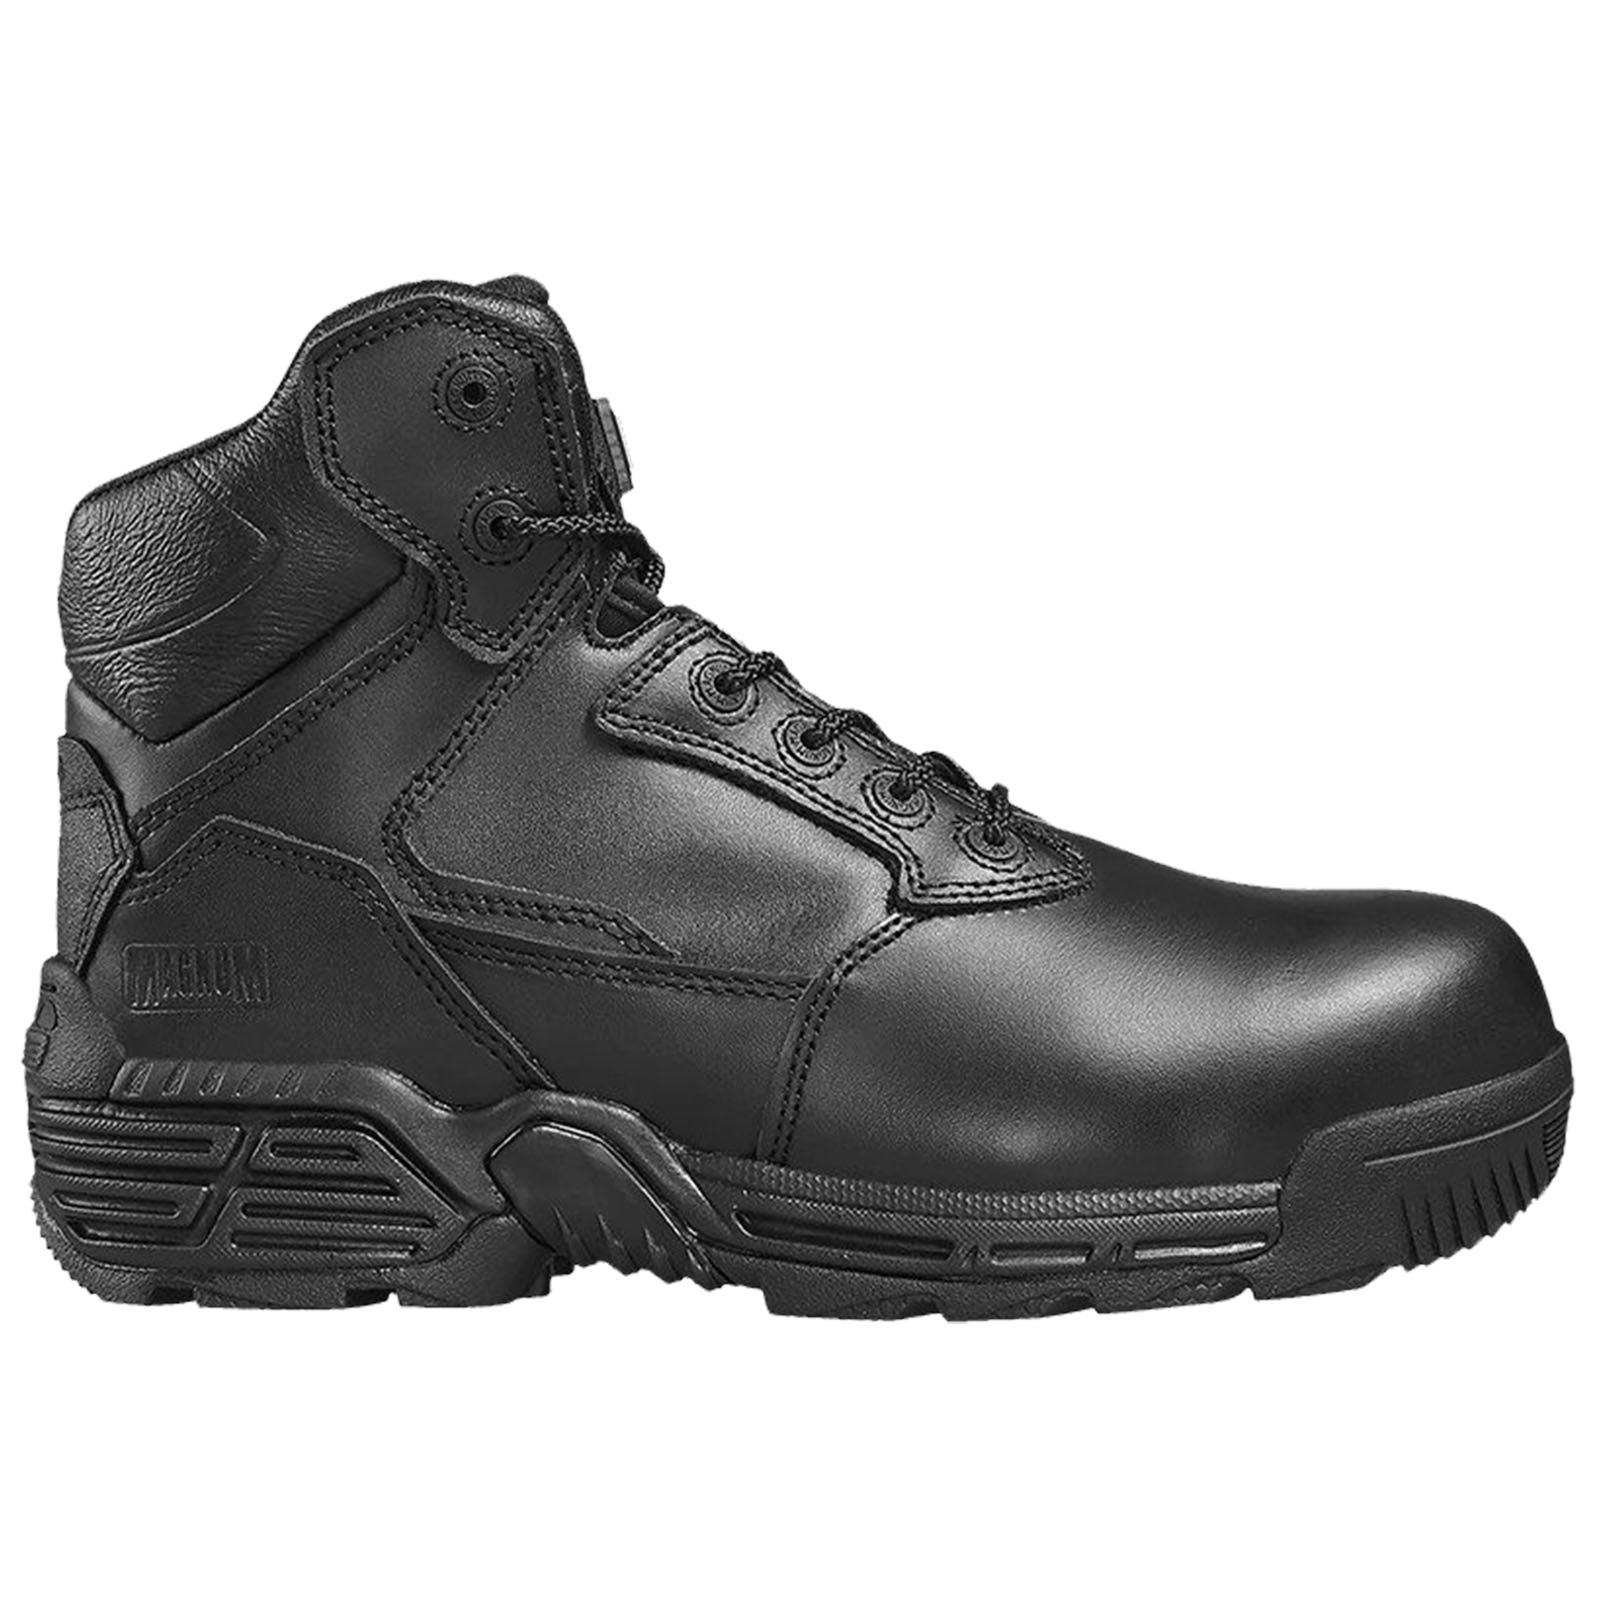 Magnum Unisex Stealth Force 6.0 S3 Safety Boots